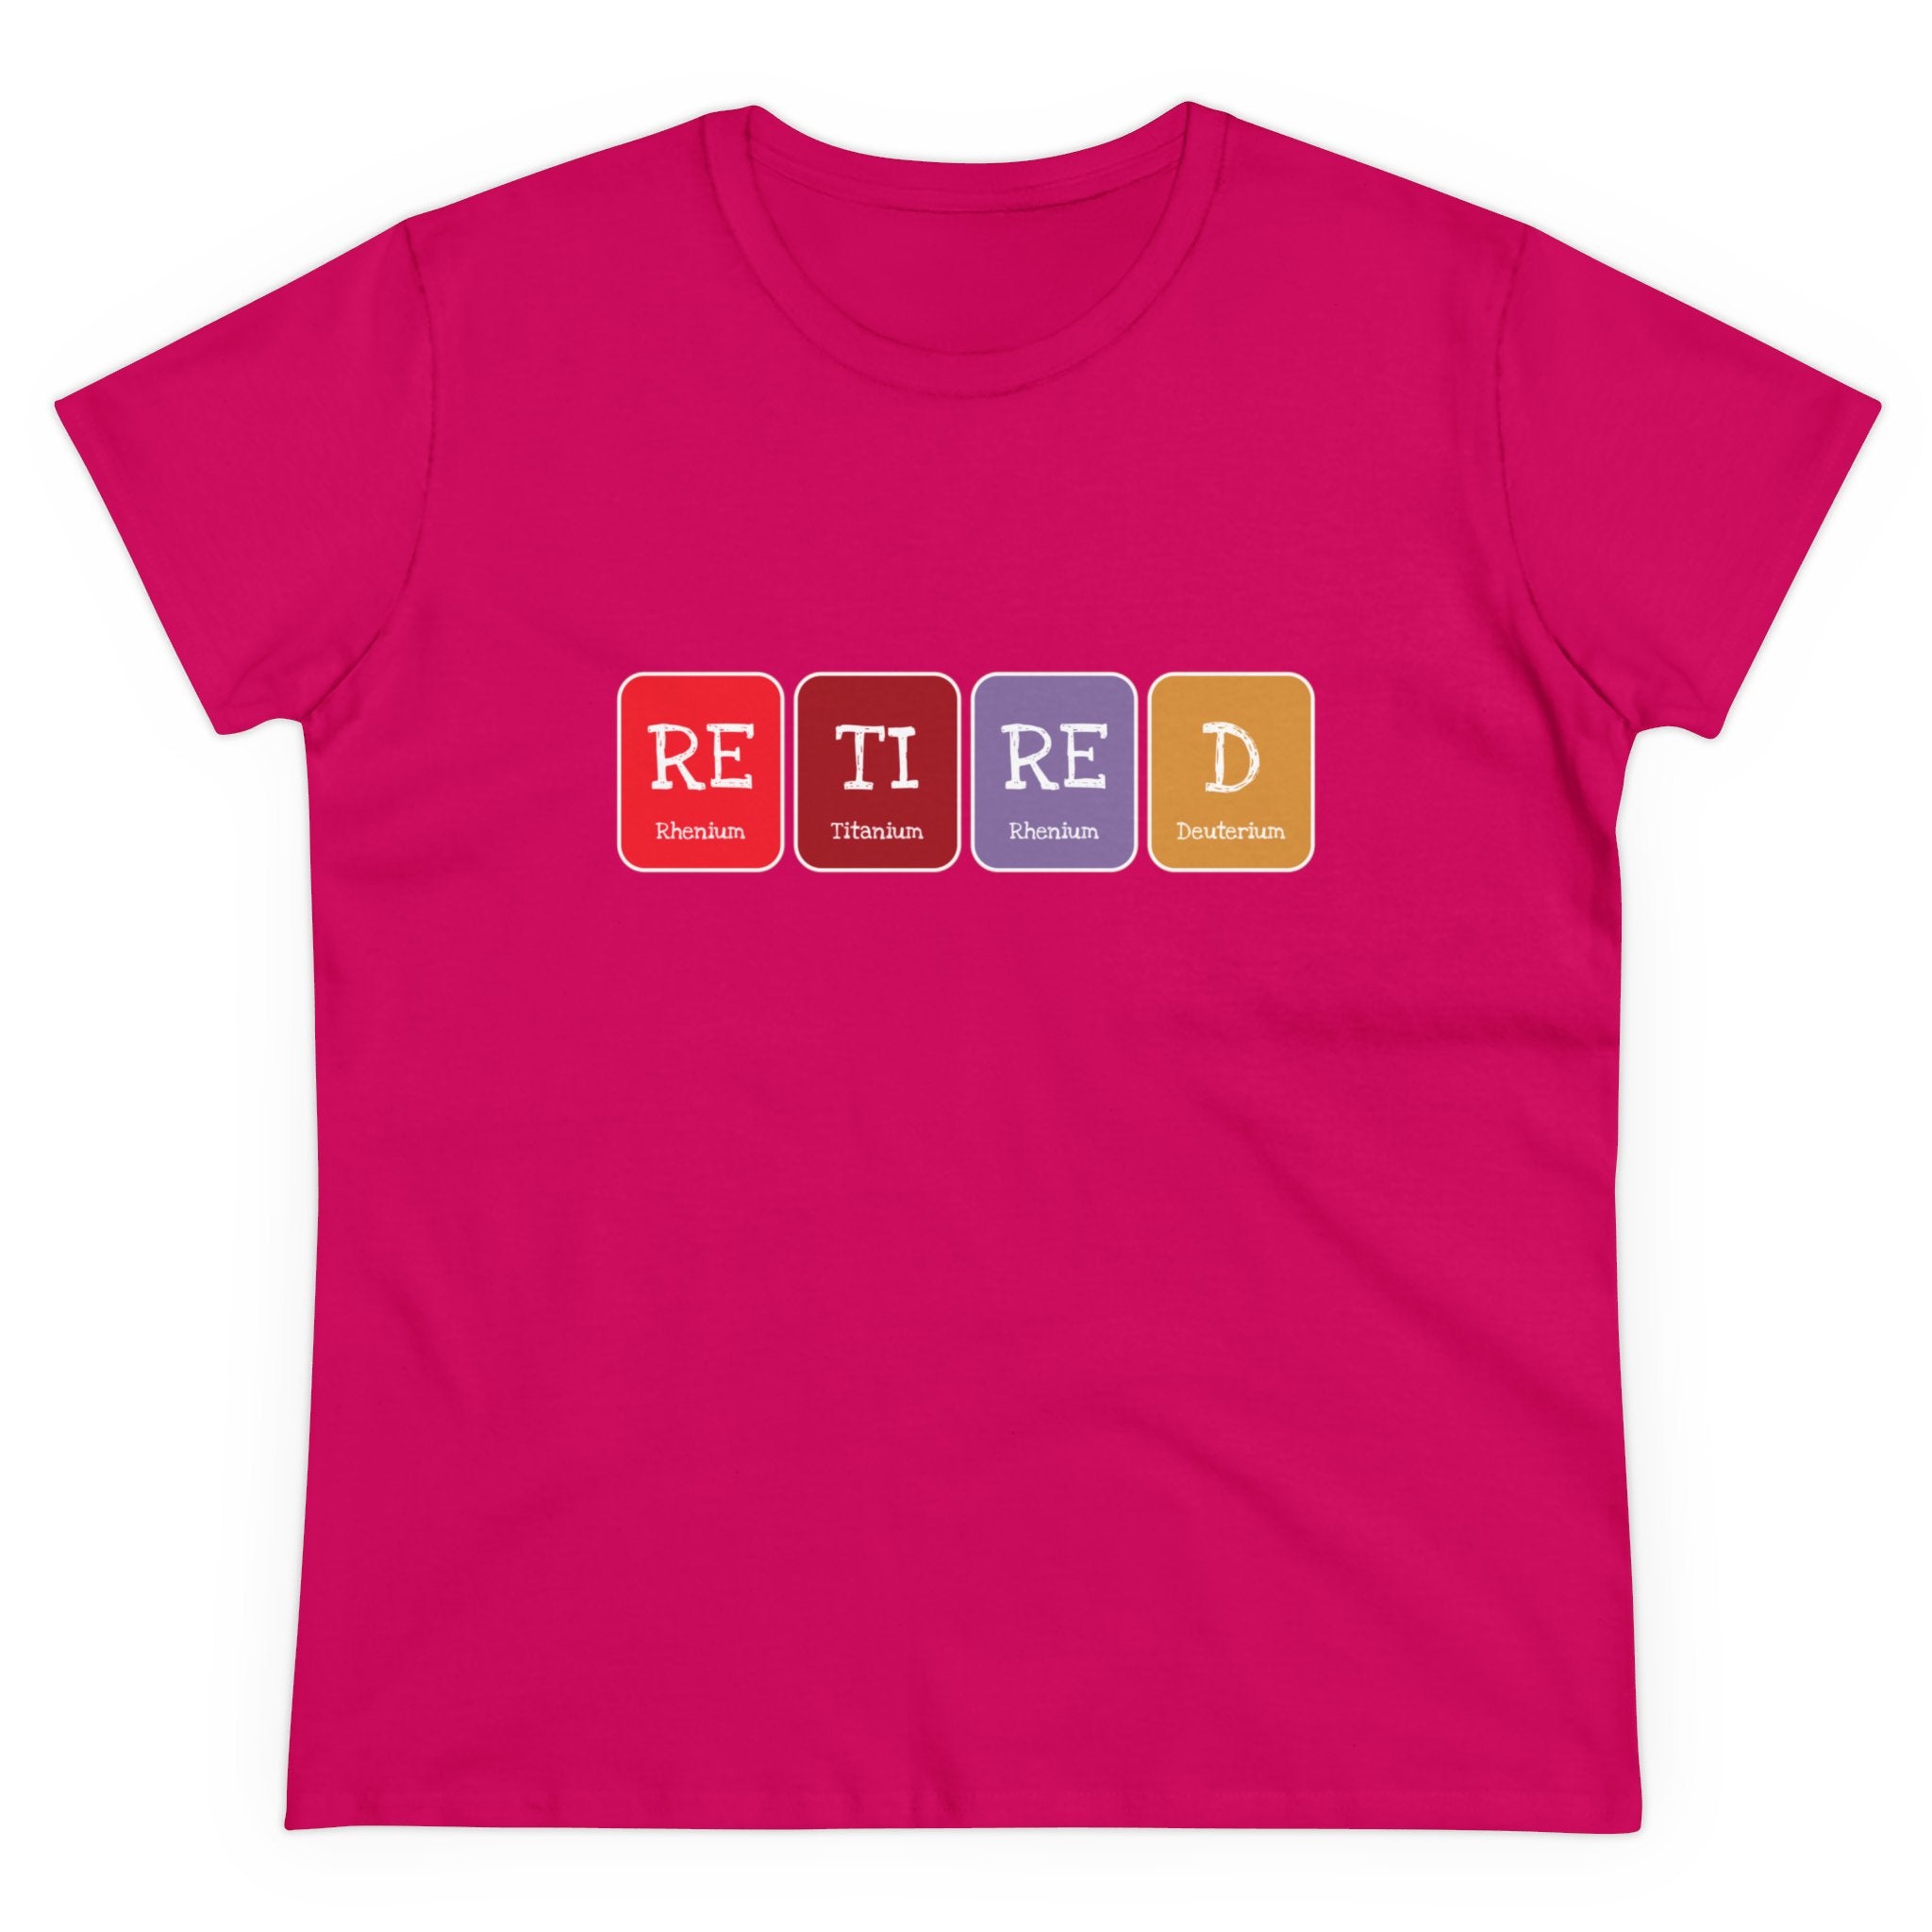 A magenta Retired - Women's Tee featuring a design resembling periodic table elements spelling out "Retired" using red, white, purple, and gold colored blocks, combining style and comfort.